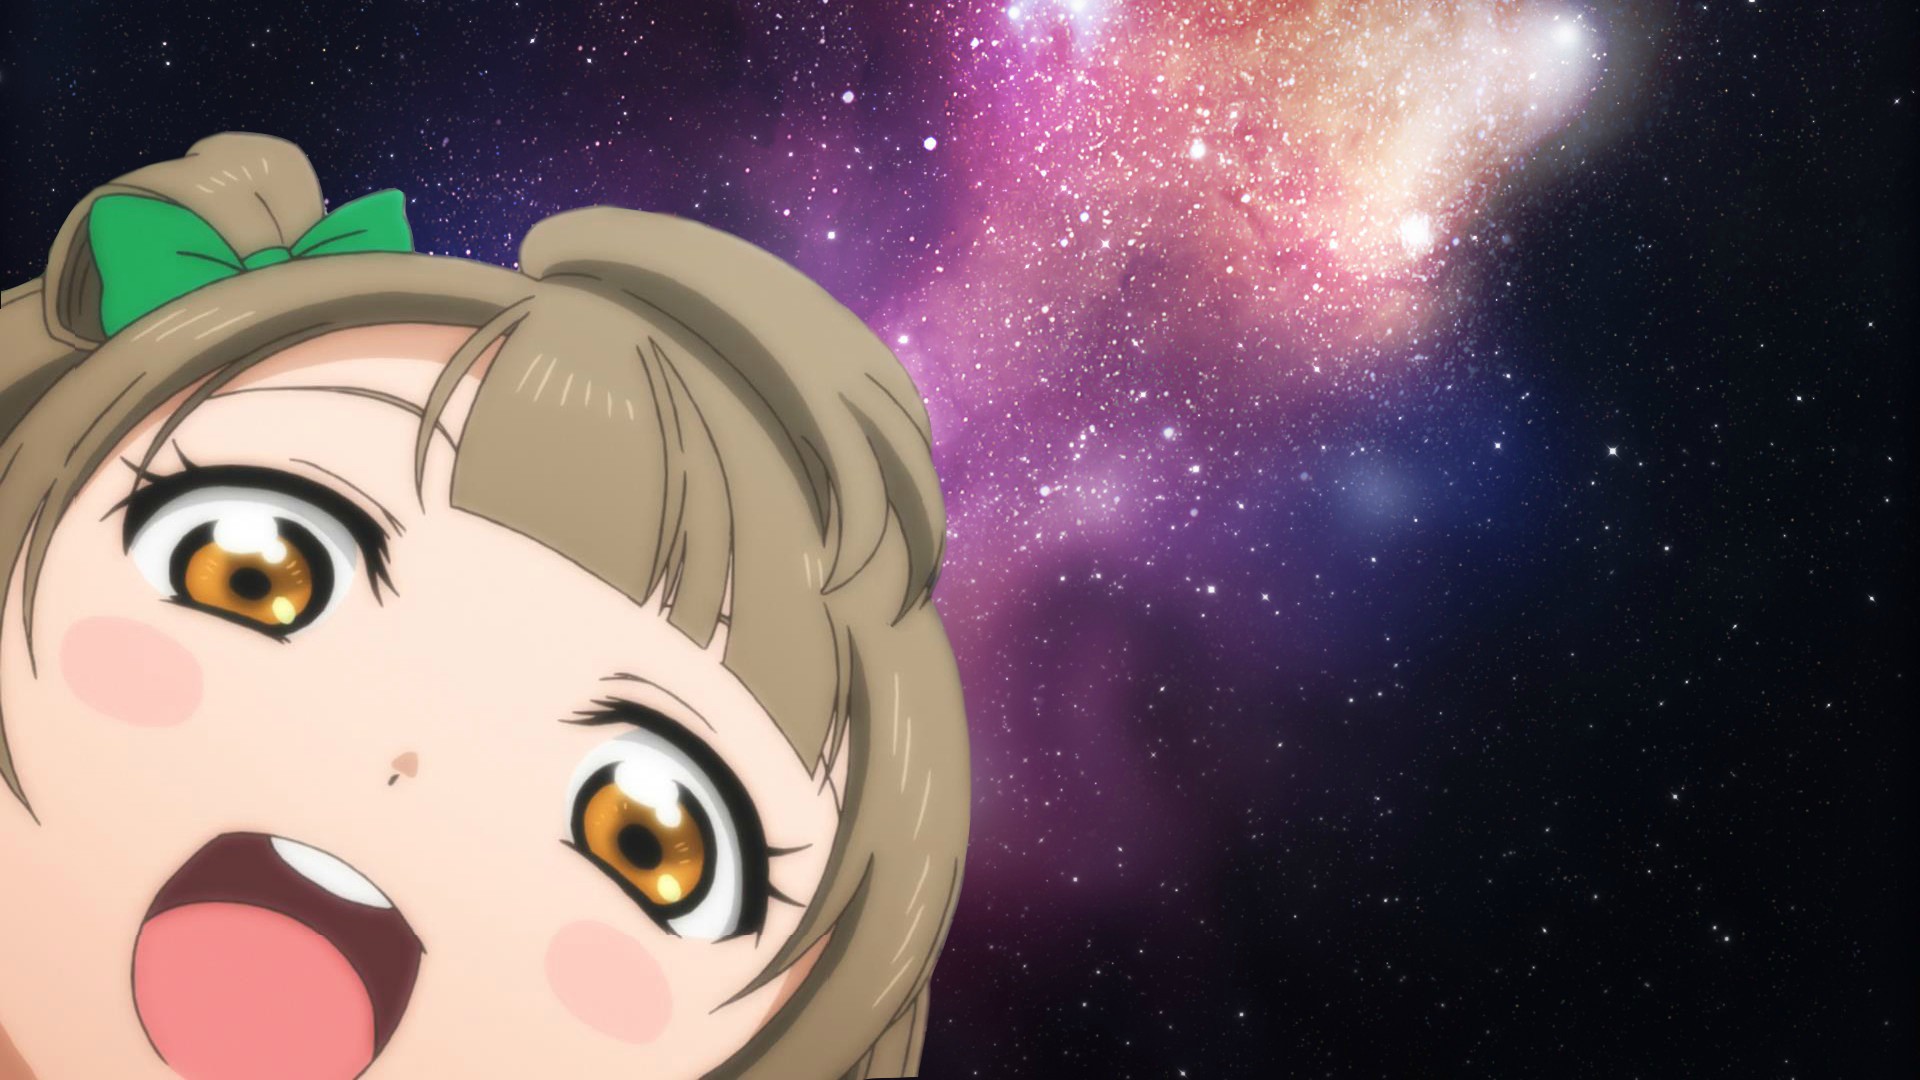 love live wallpaper hd,cartoon,anime,space,outer space,animated cartoon